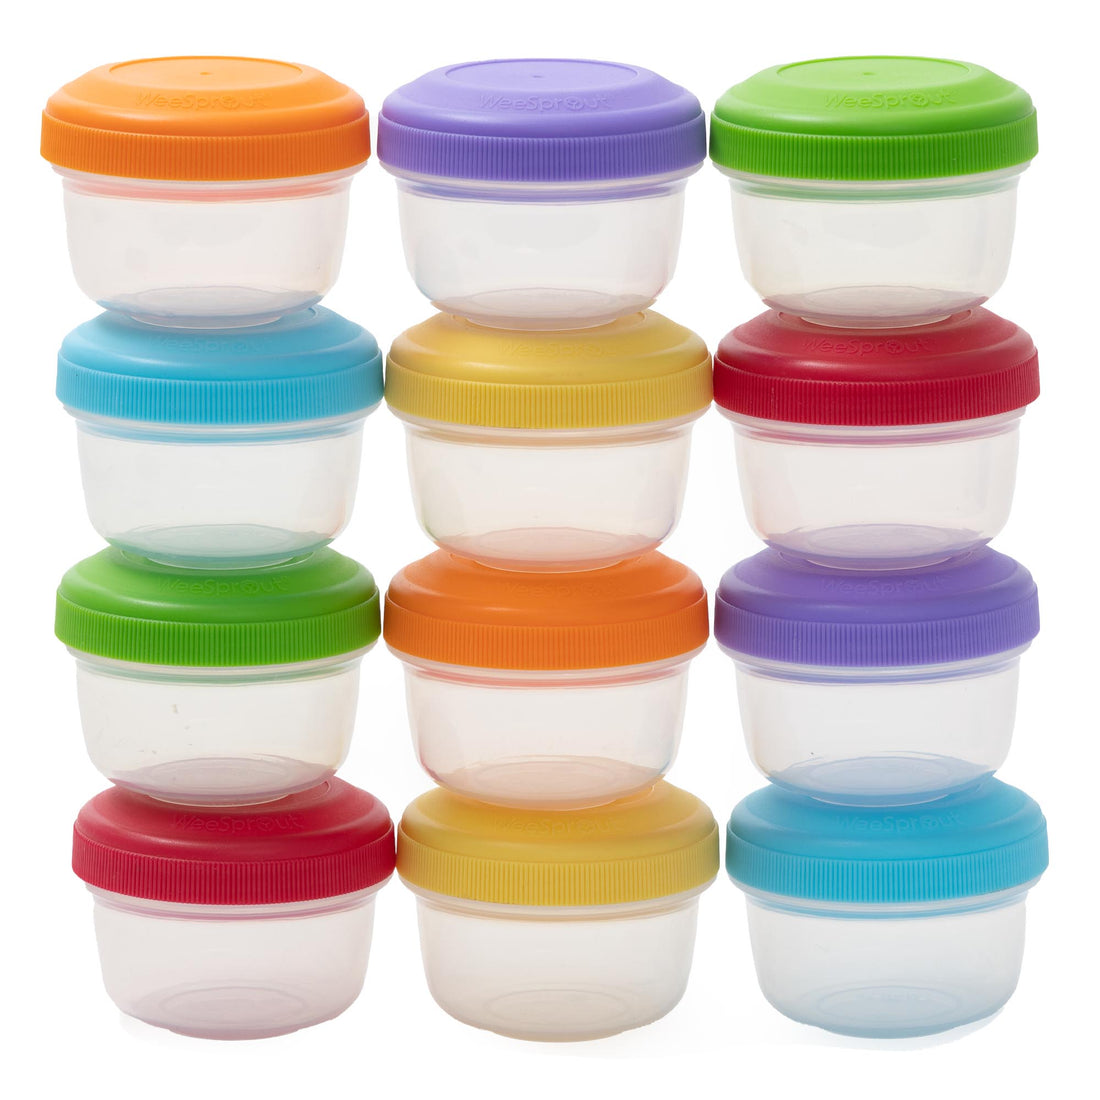 Get Lock & Lock Baby Food Container, Sealed Storage Box Green Delivered